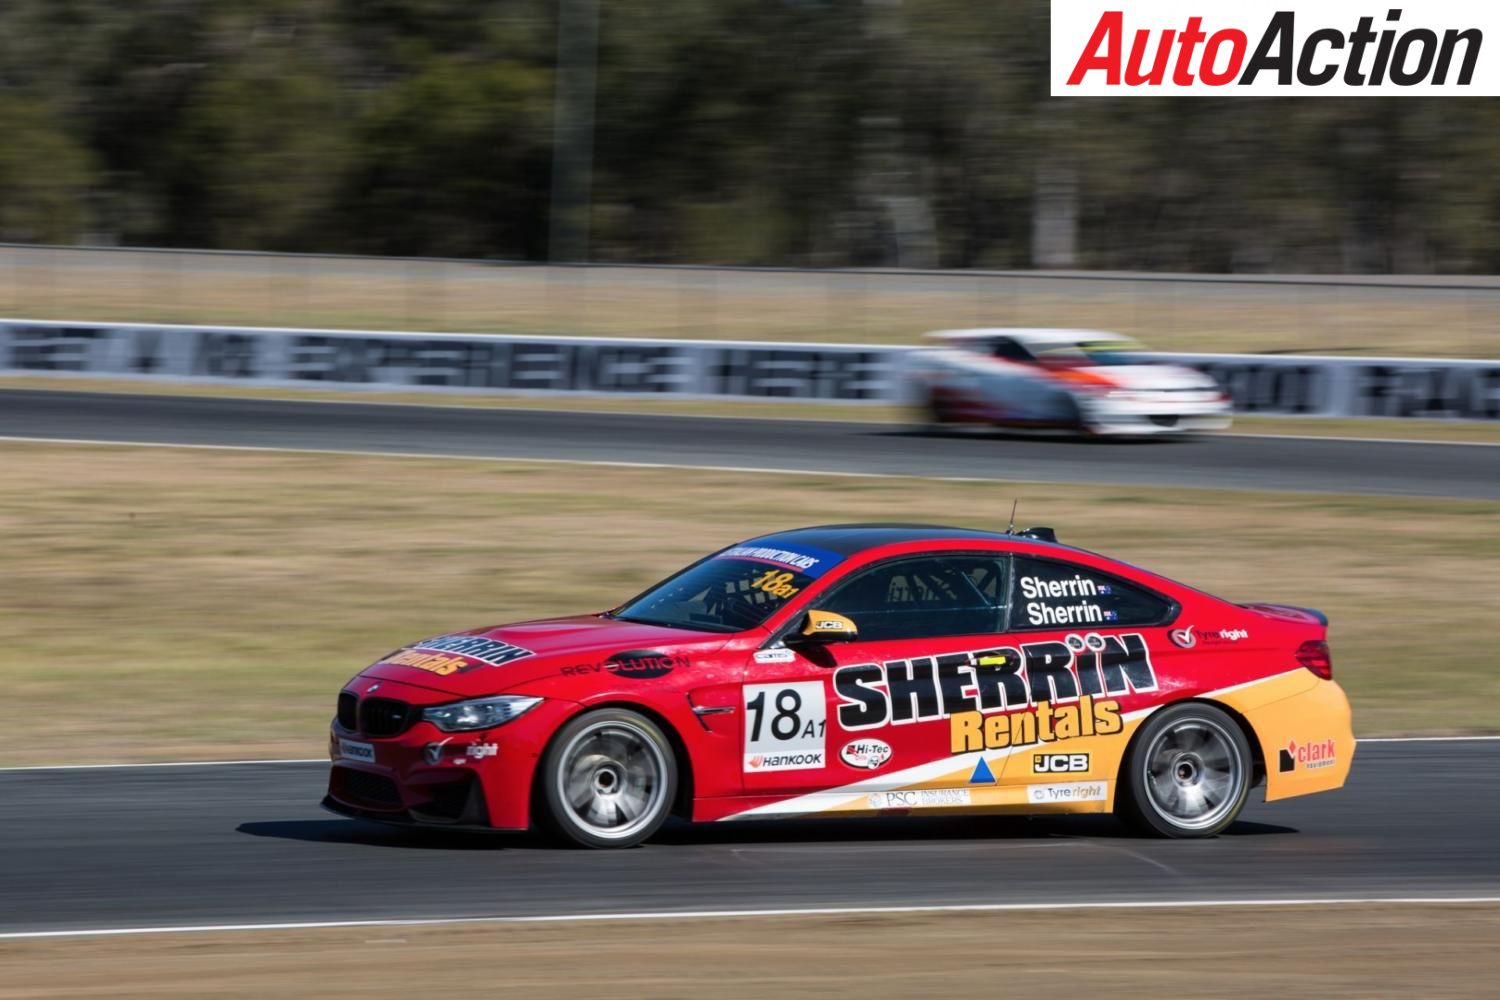 Grant and Iain Sherrin headed the time sheets in Australian Production Cars - Photo: Rhys Vandersyde